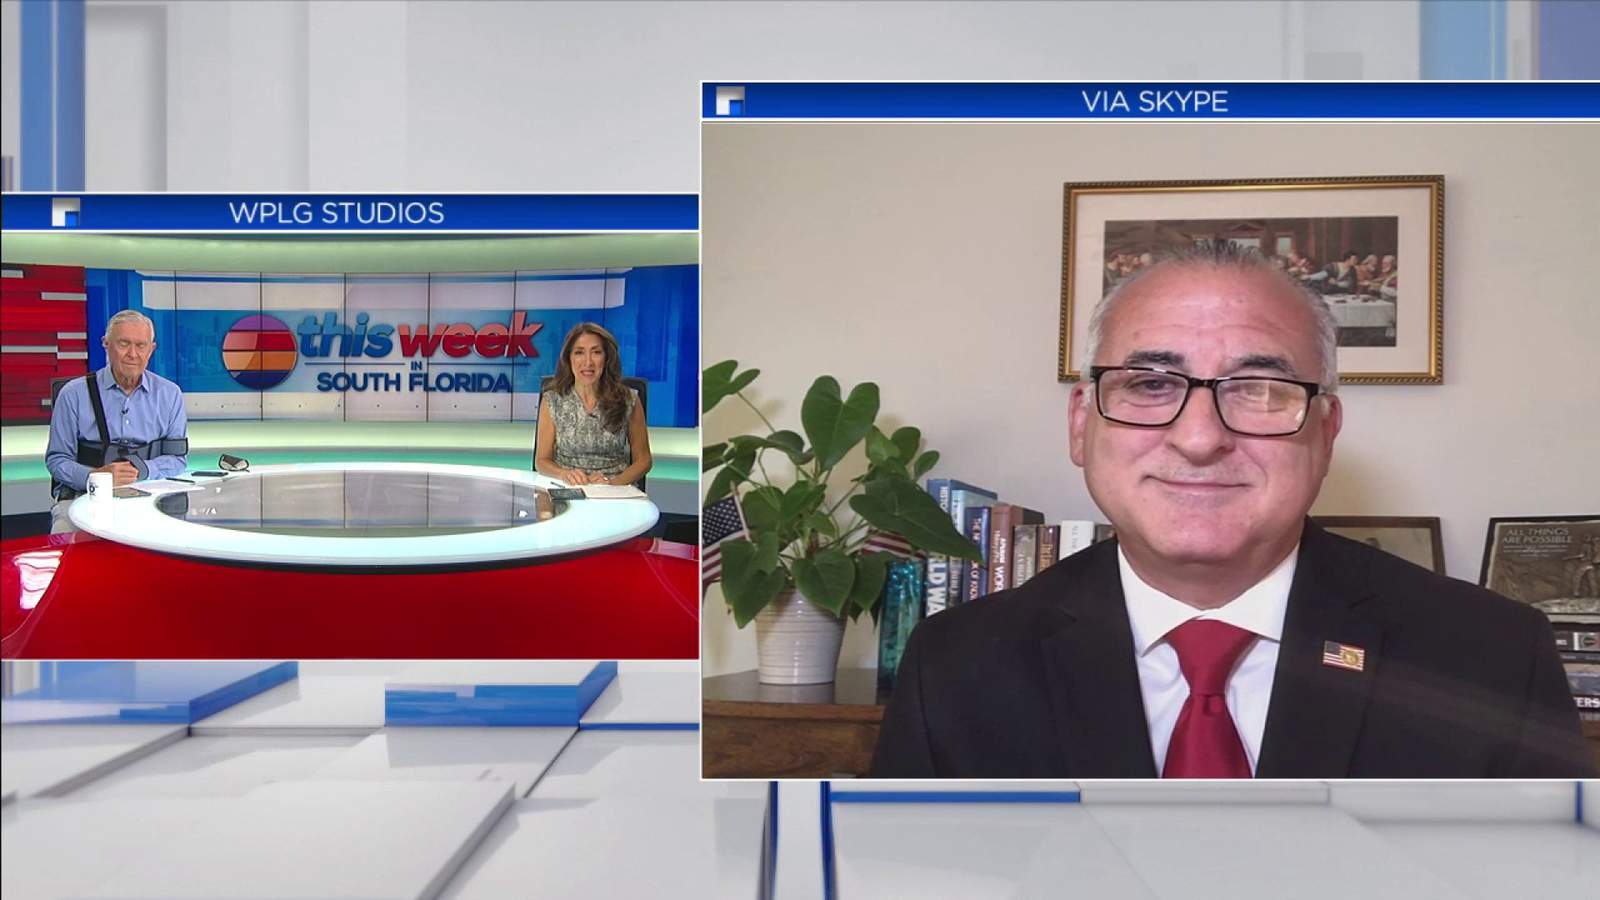 This Week in Stouh Florida: Miami-Dade County Commissioner Steve Bovo